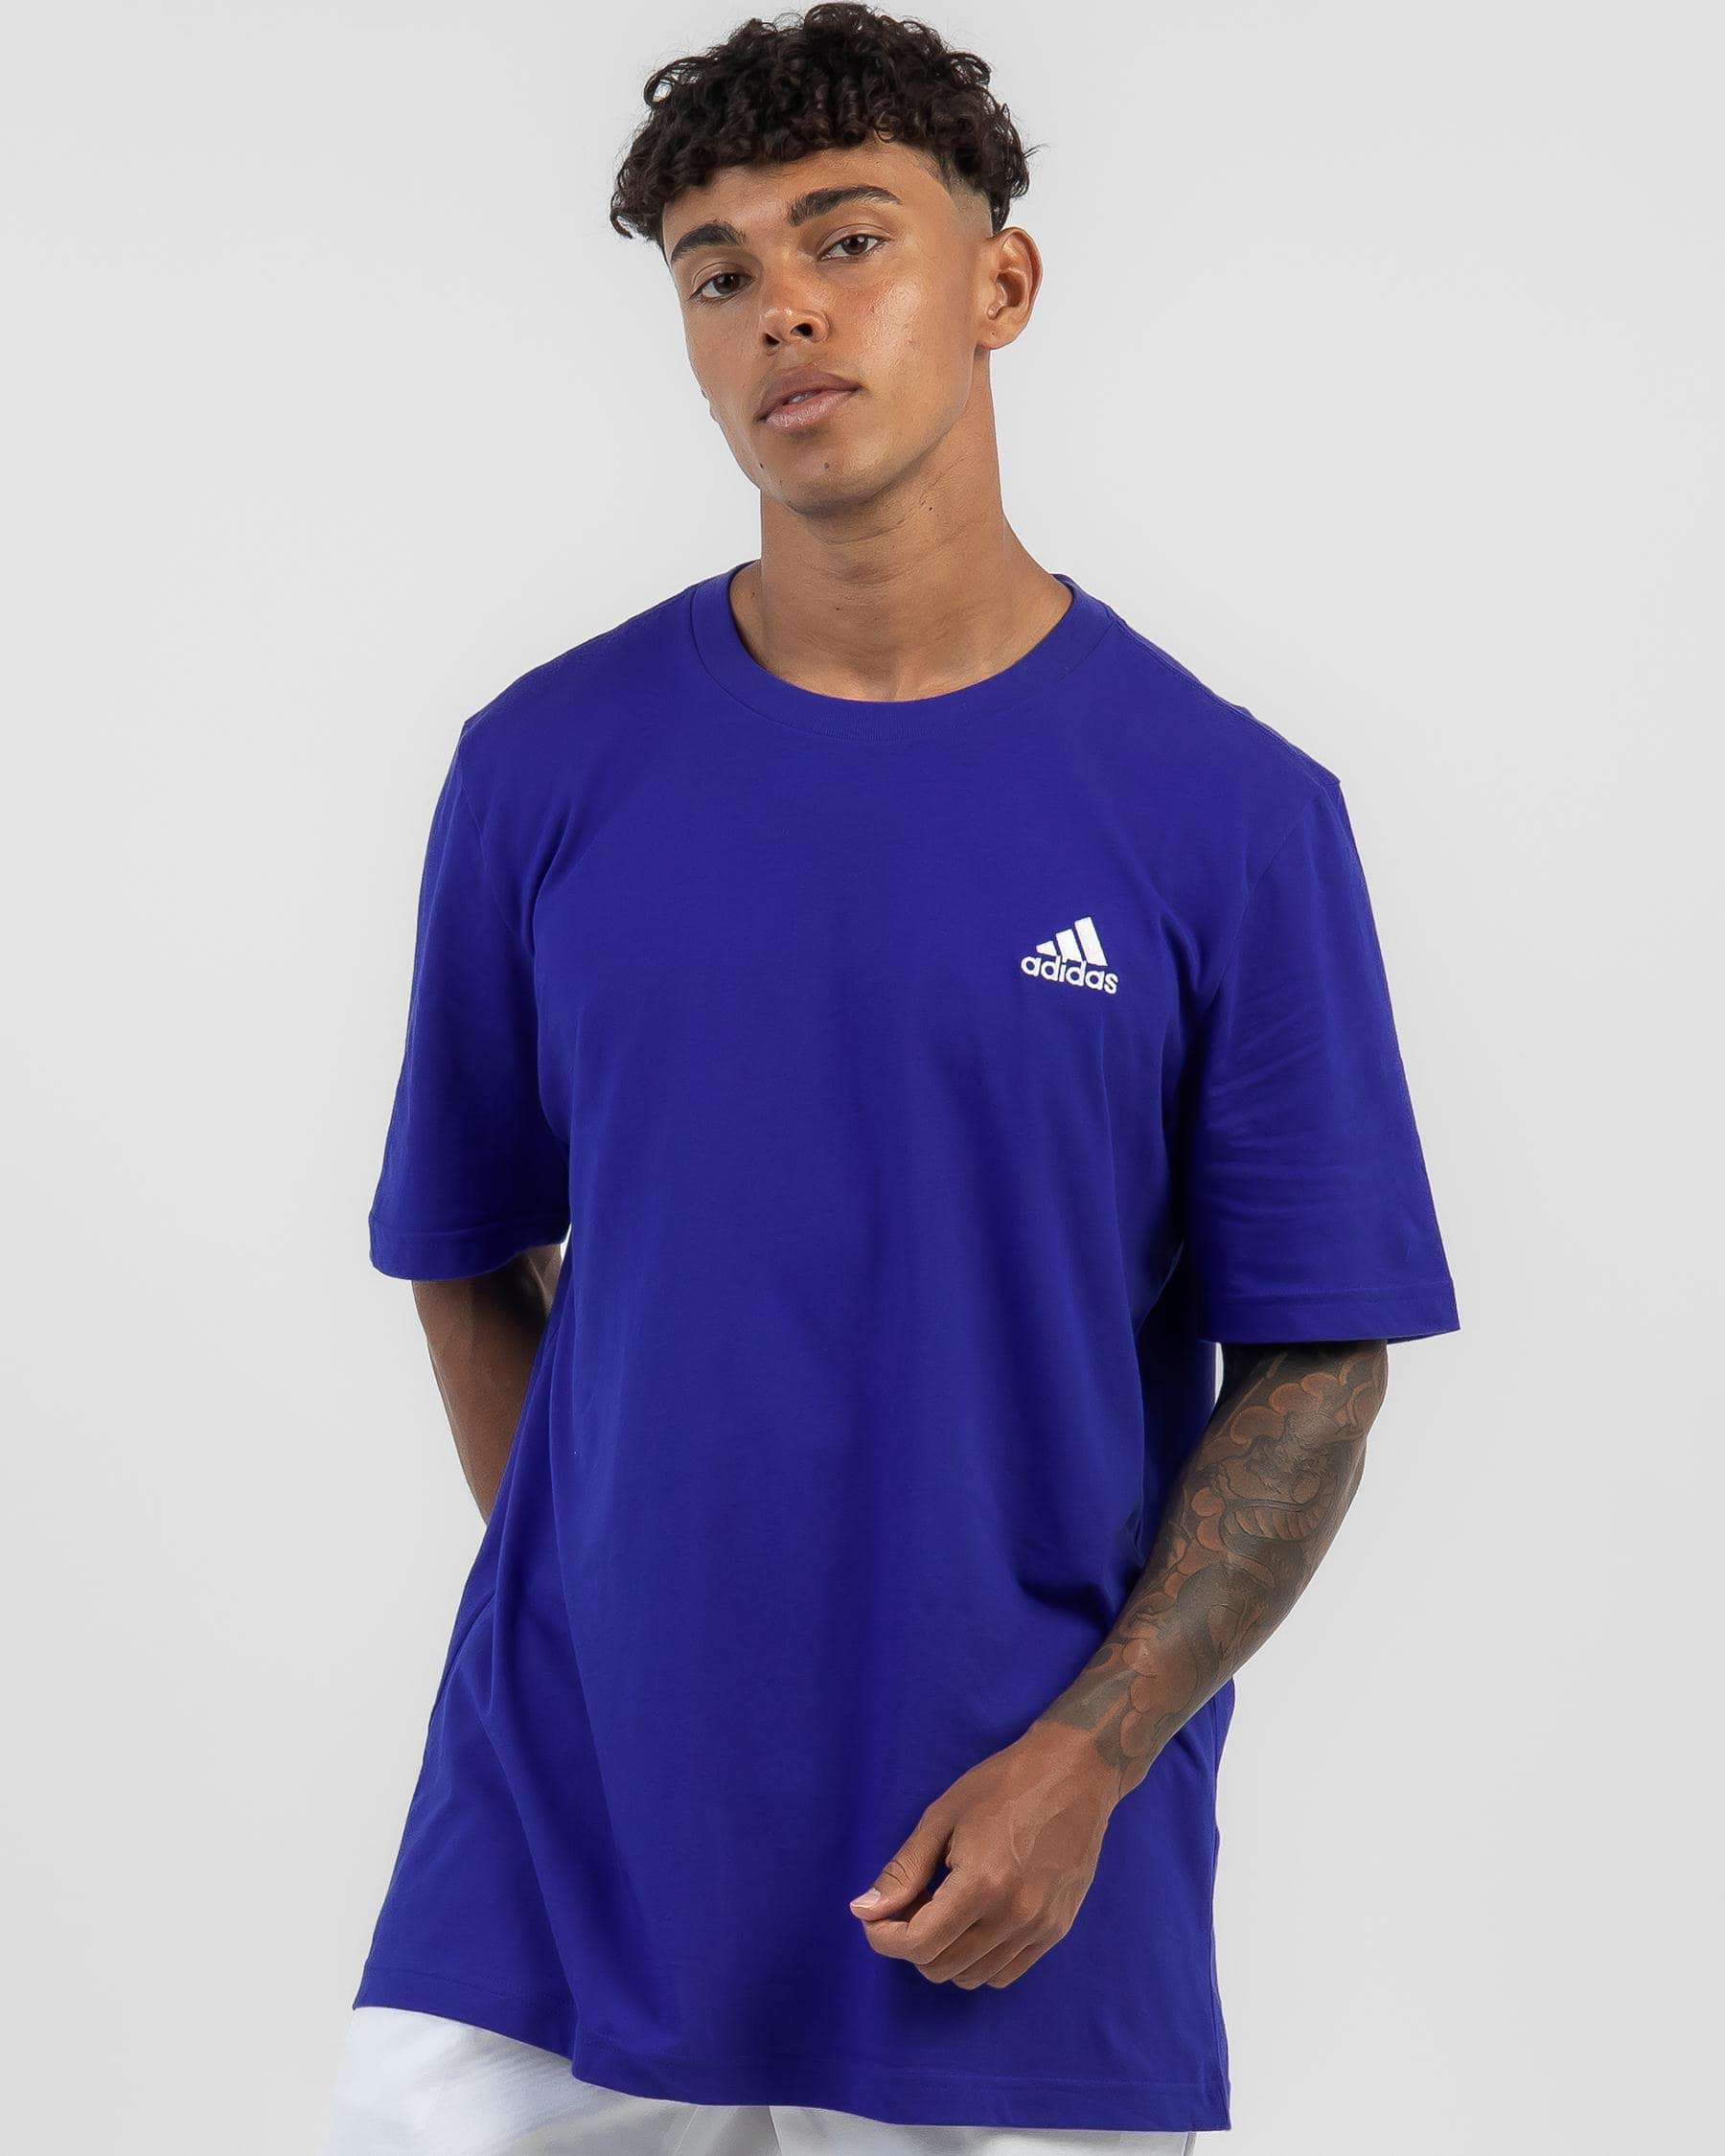 Adidas City Returns In FREE* Semi Beach Logo Lucid Blue Easy - Small Shipping & - T-Shirt States United